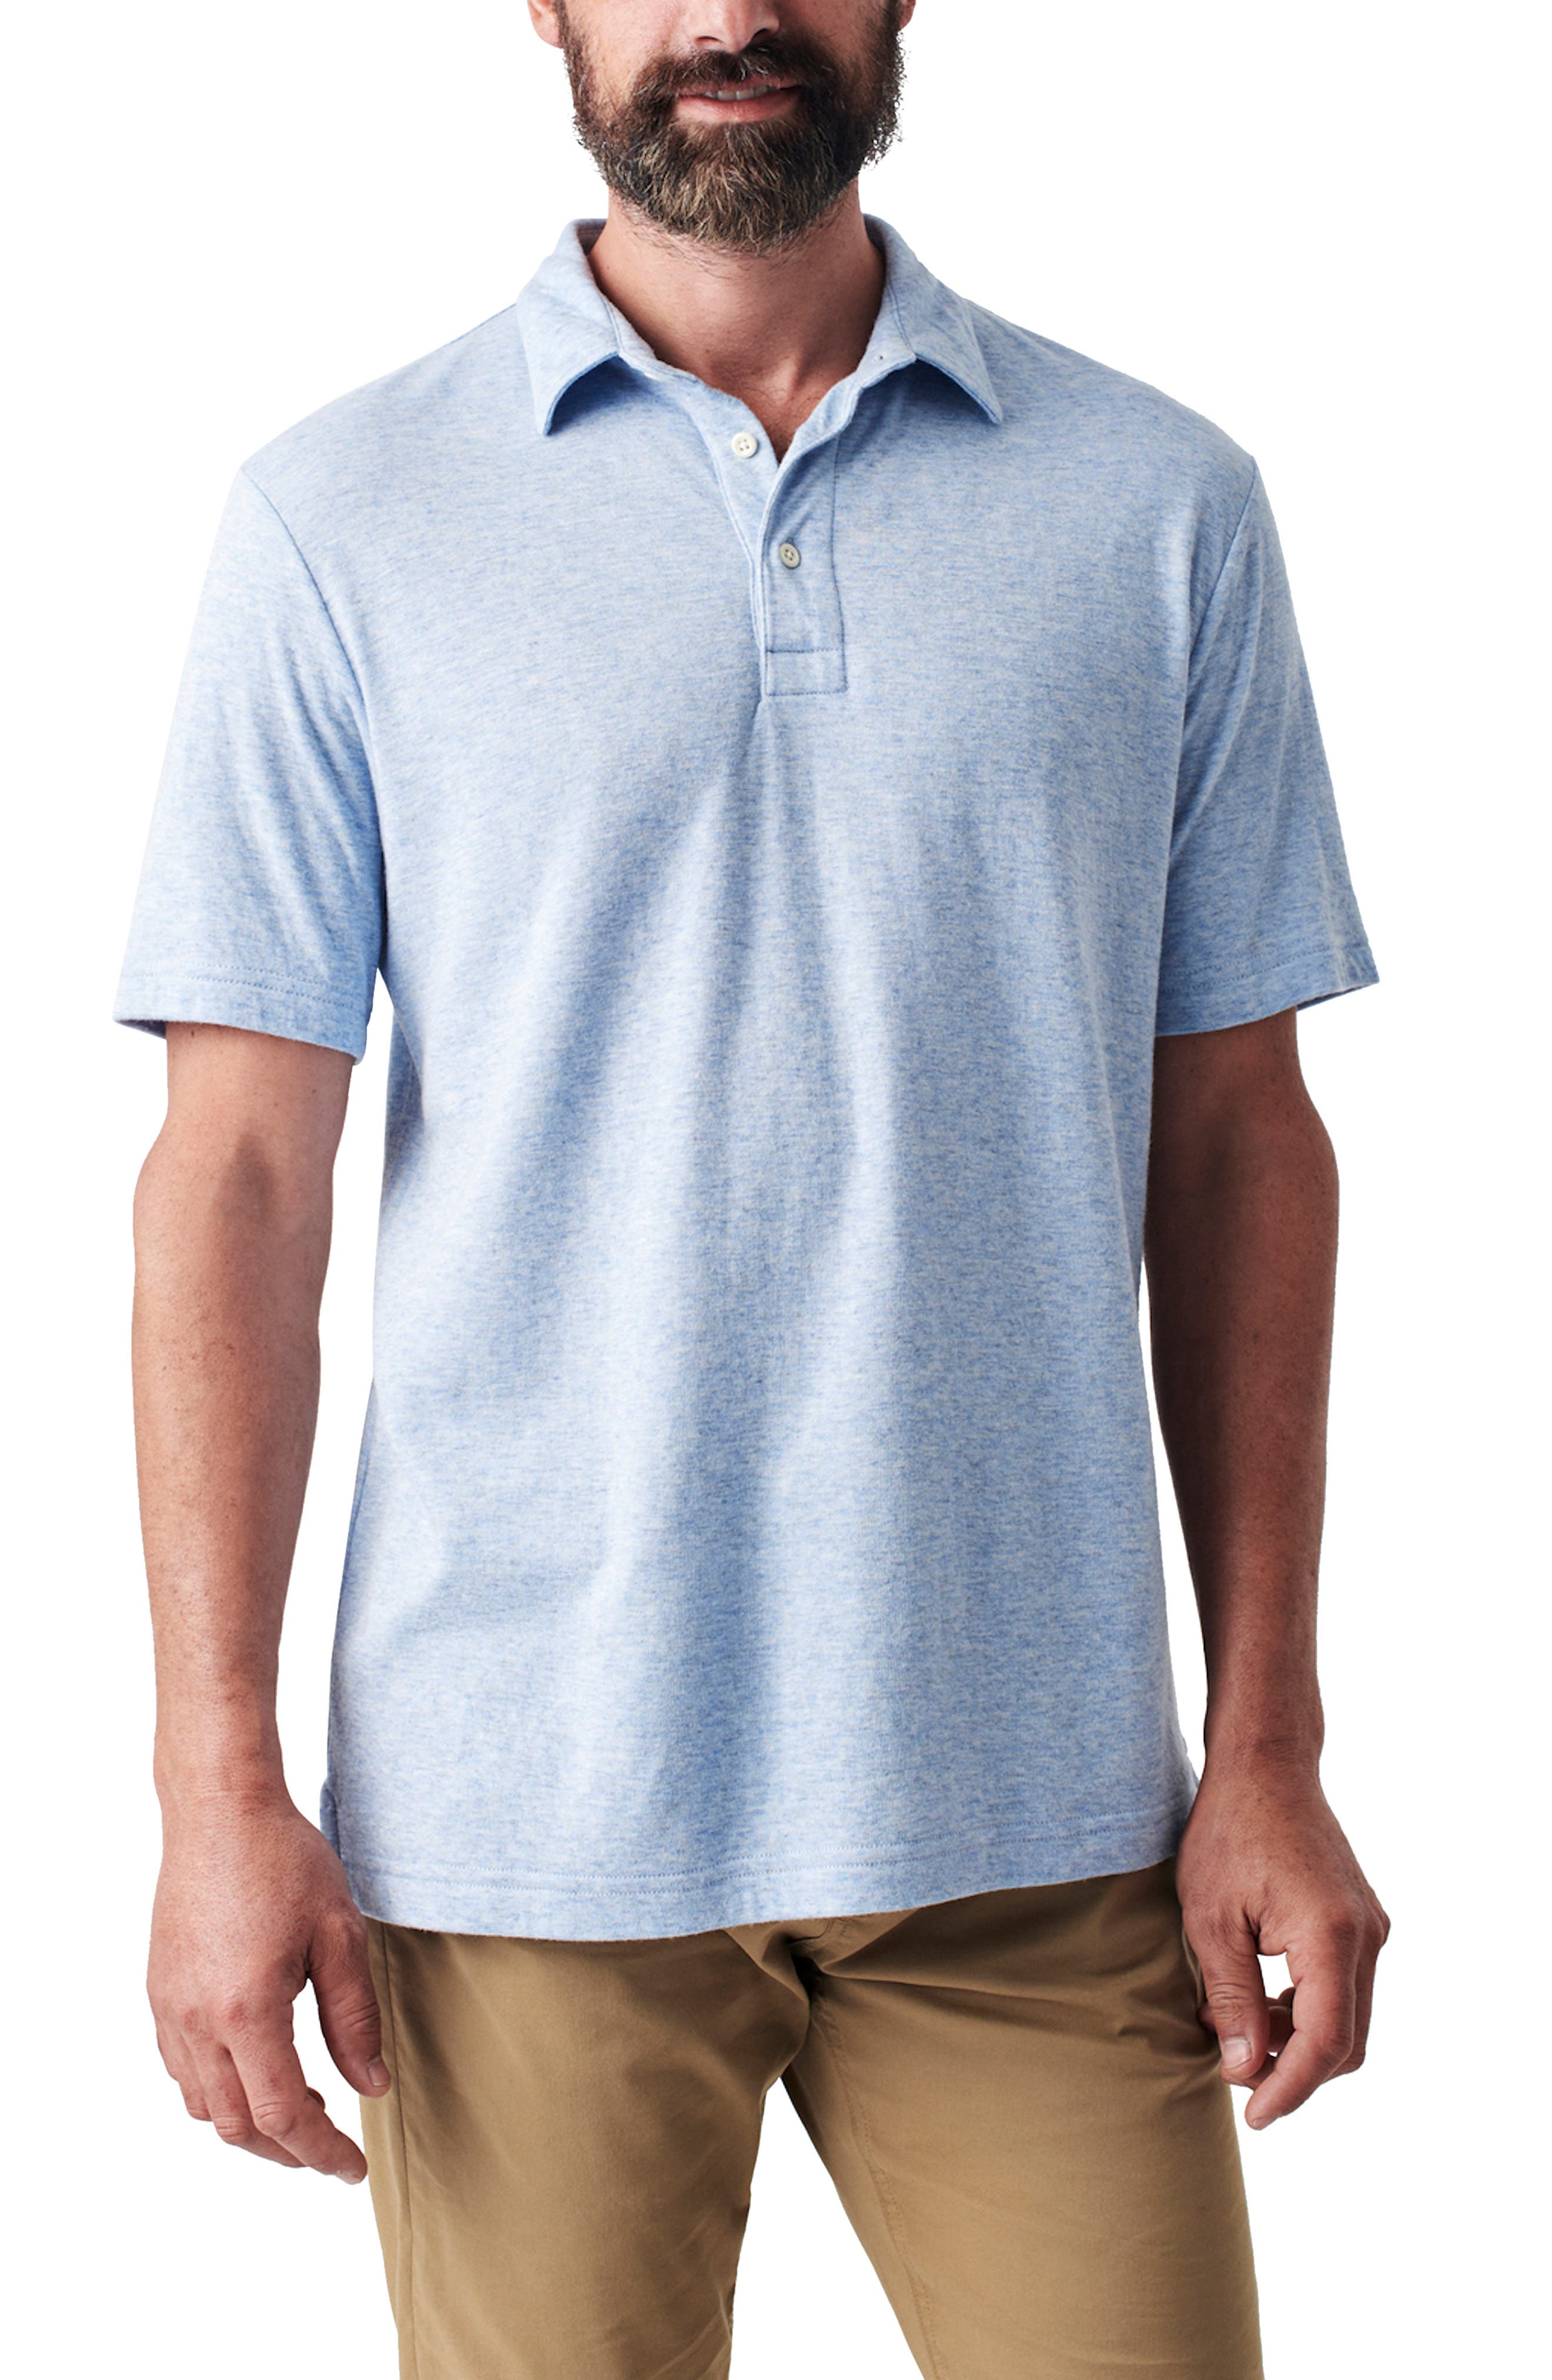 tall in Blue for Men Mens Clothing T-shirts Polo shirts Faherty Cotton Short-sleeve Movementtm Polo Shirt 